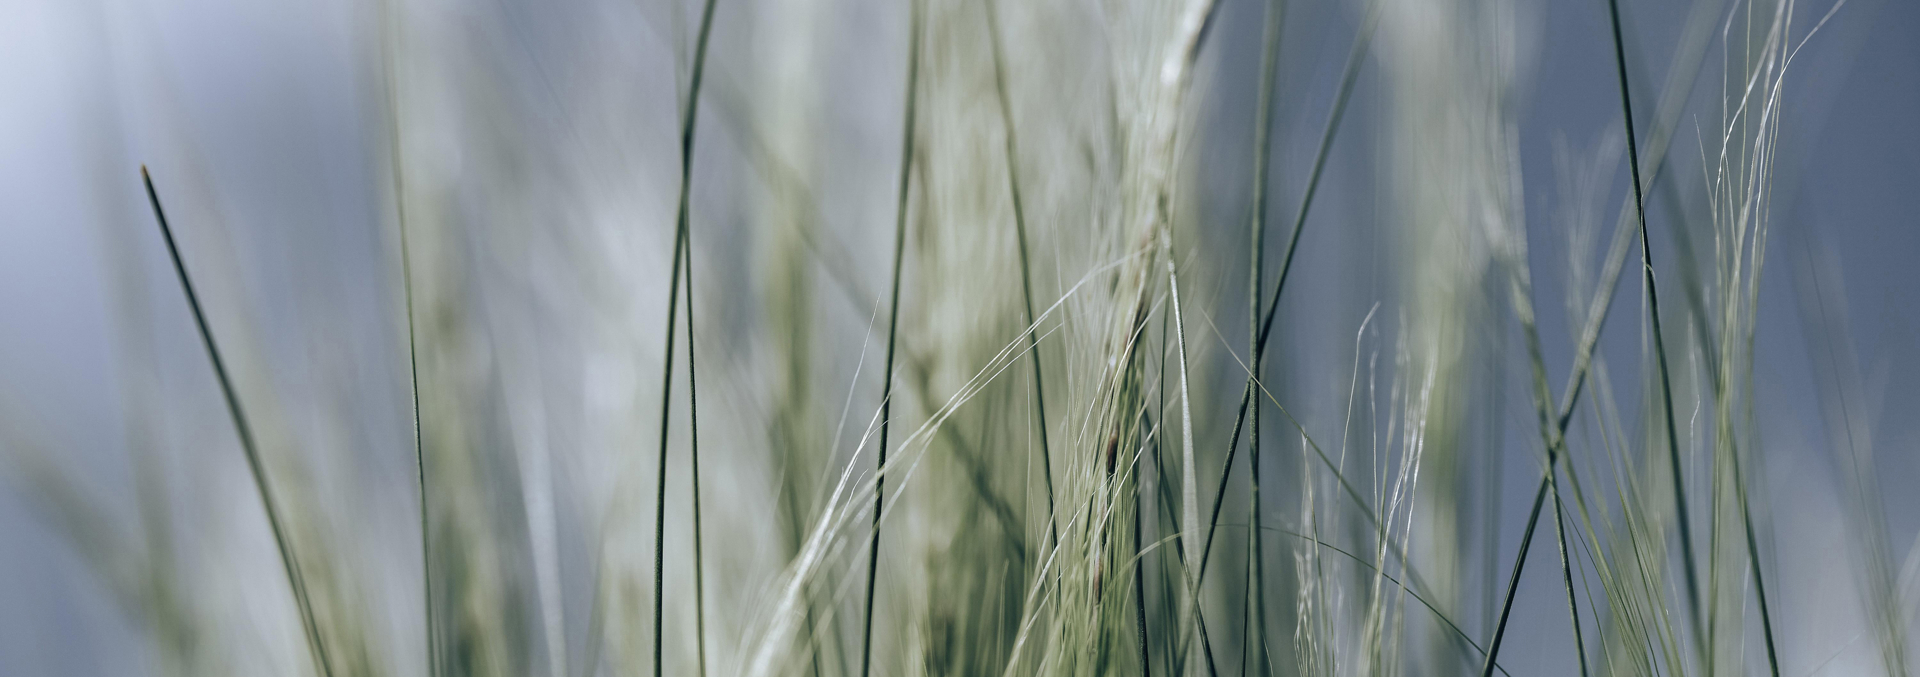 Close up image showing strands of tall grass